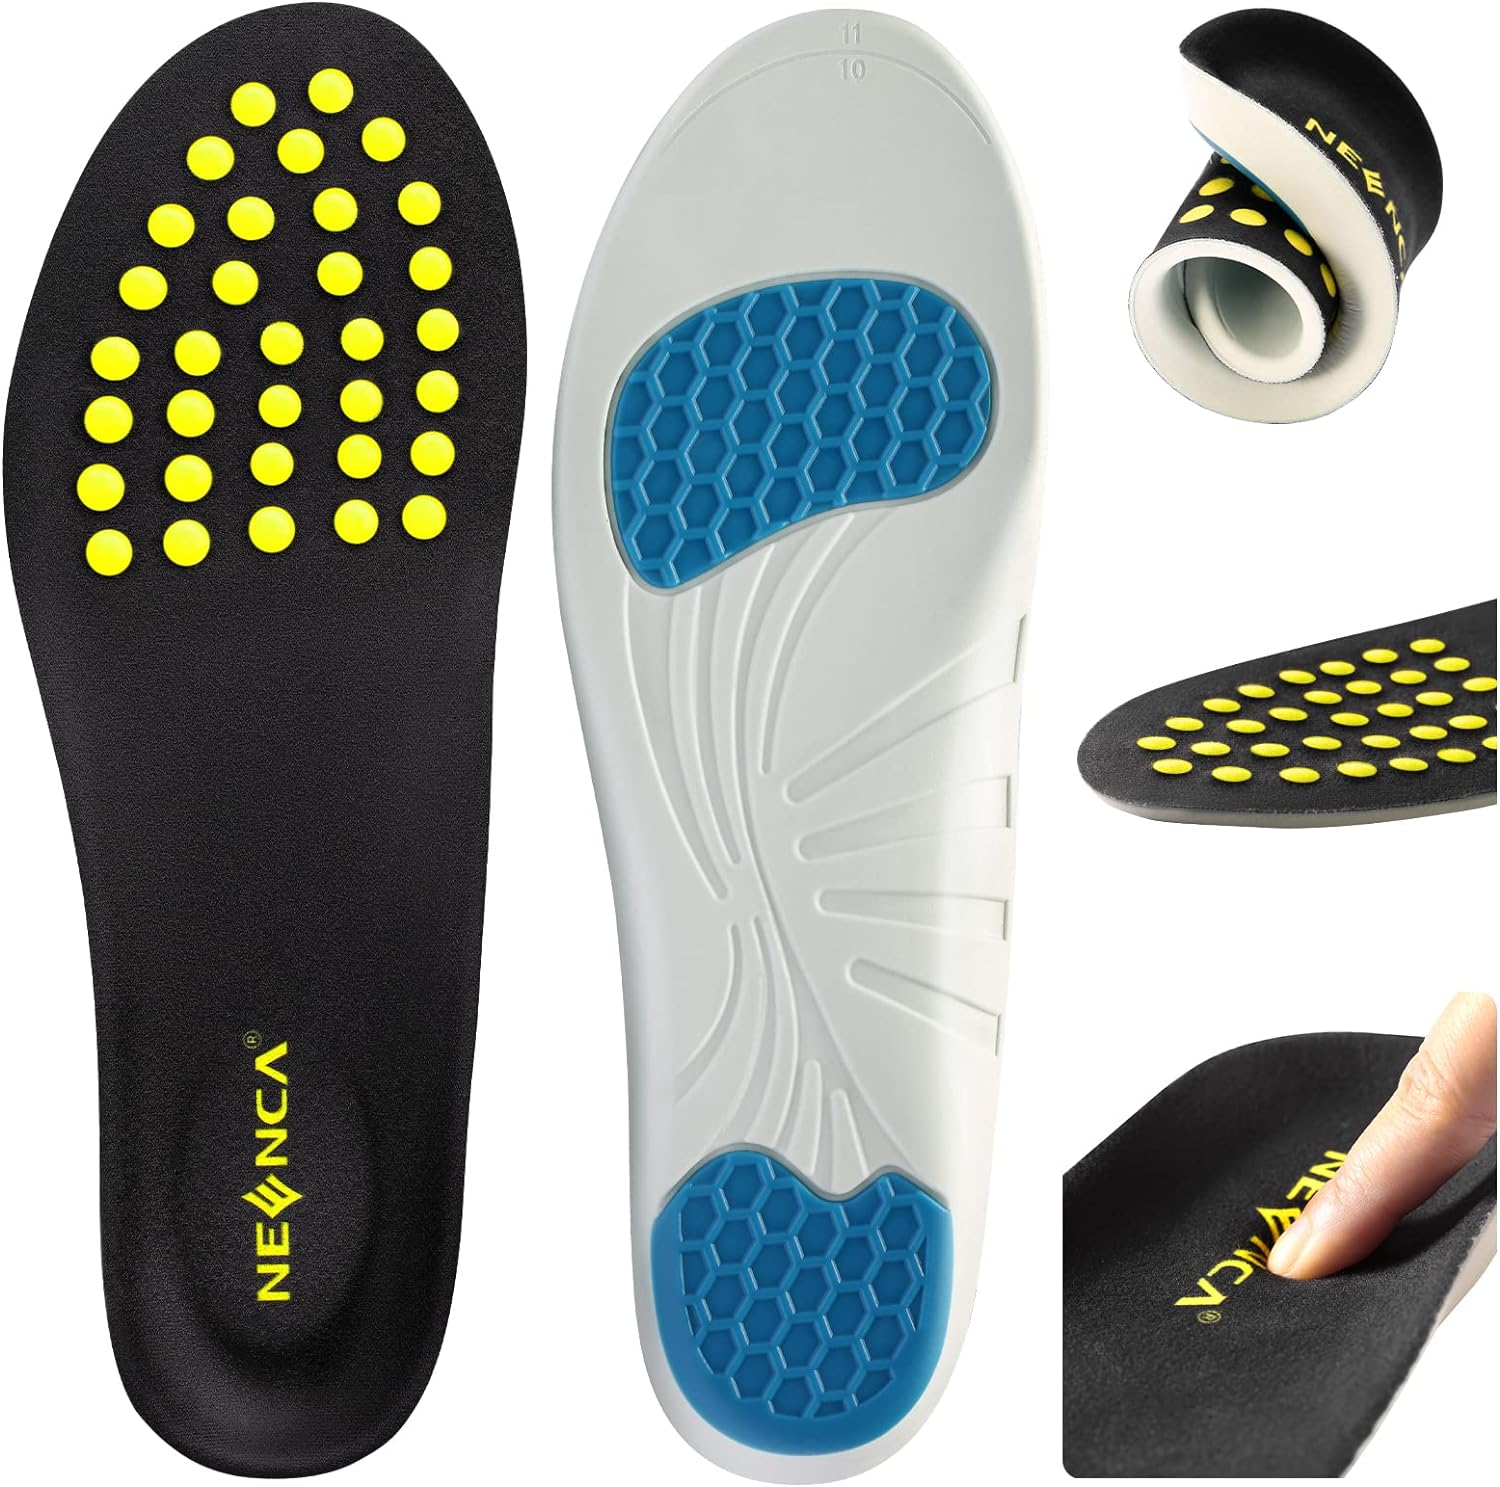 NEENCA Professional Shoe Insoles, Comfort Memory Foam Shoe Inserts, Medical Heel Cushioning with Shock Absorption for Plantar Fasciitis, Arch/Foot/Heel Pain Relief, Workout, Sports, Daily Use